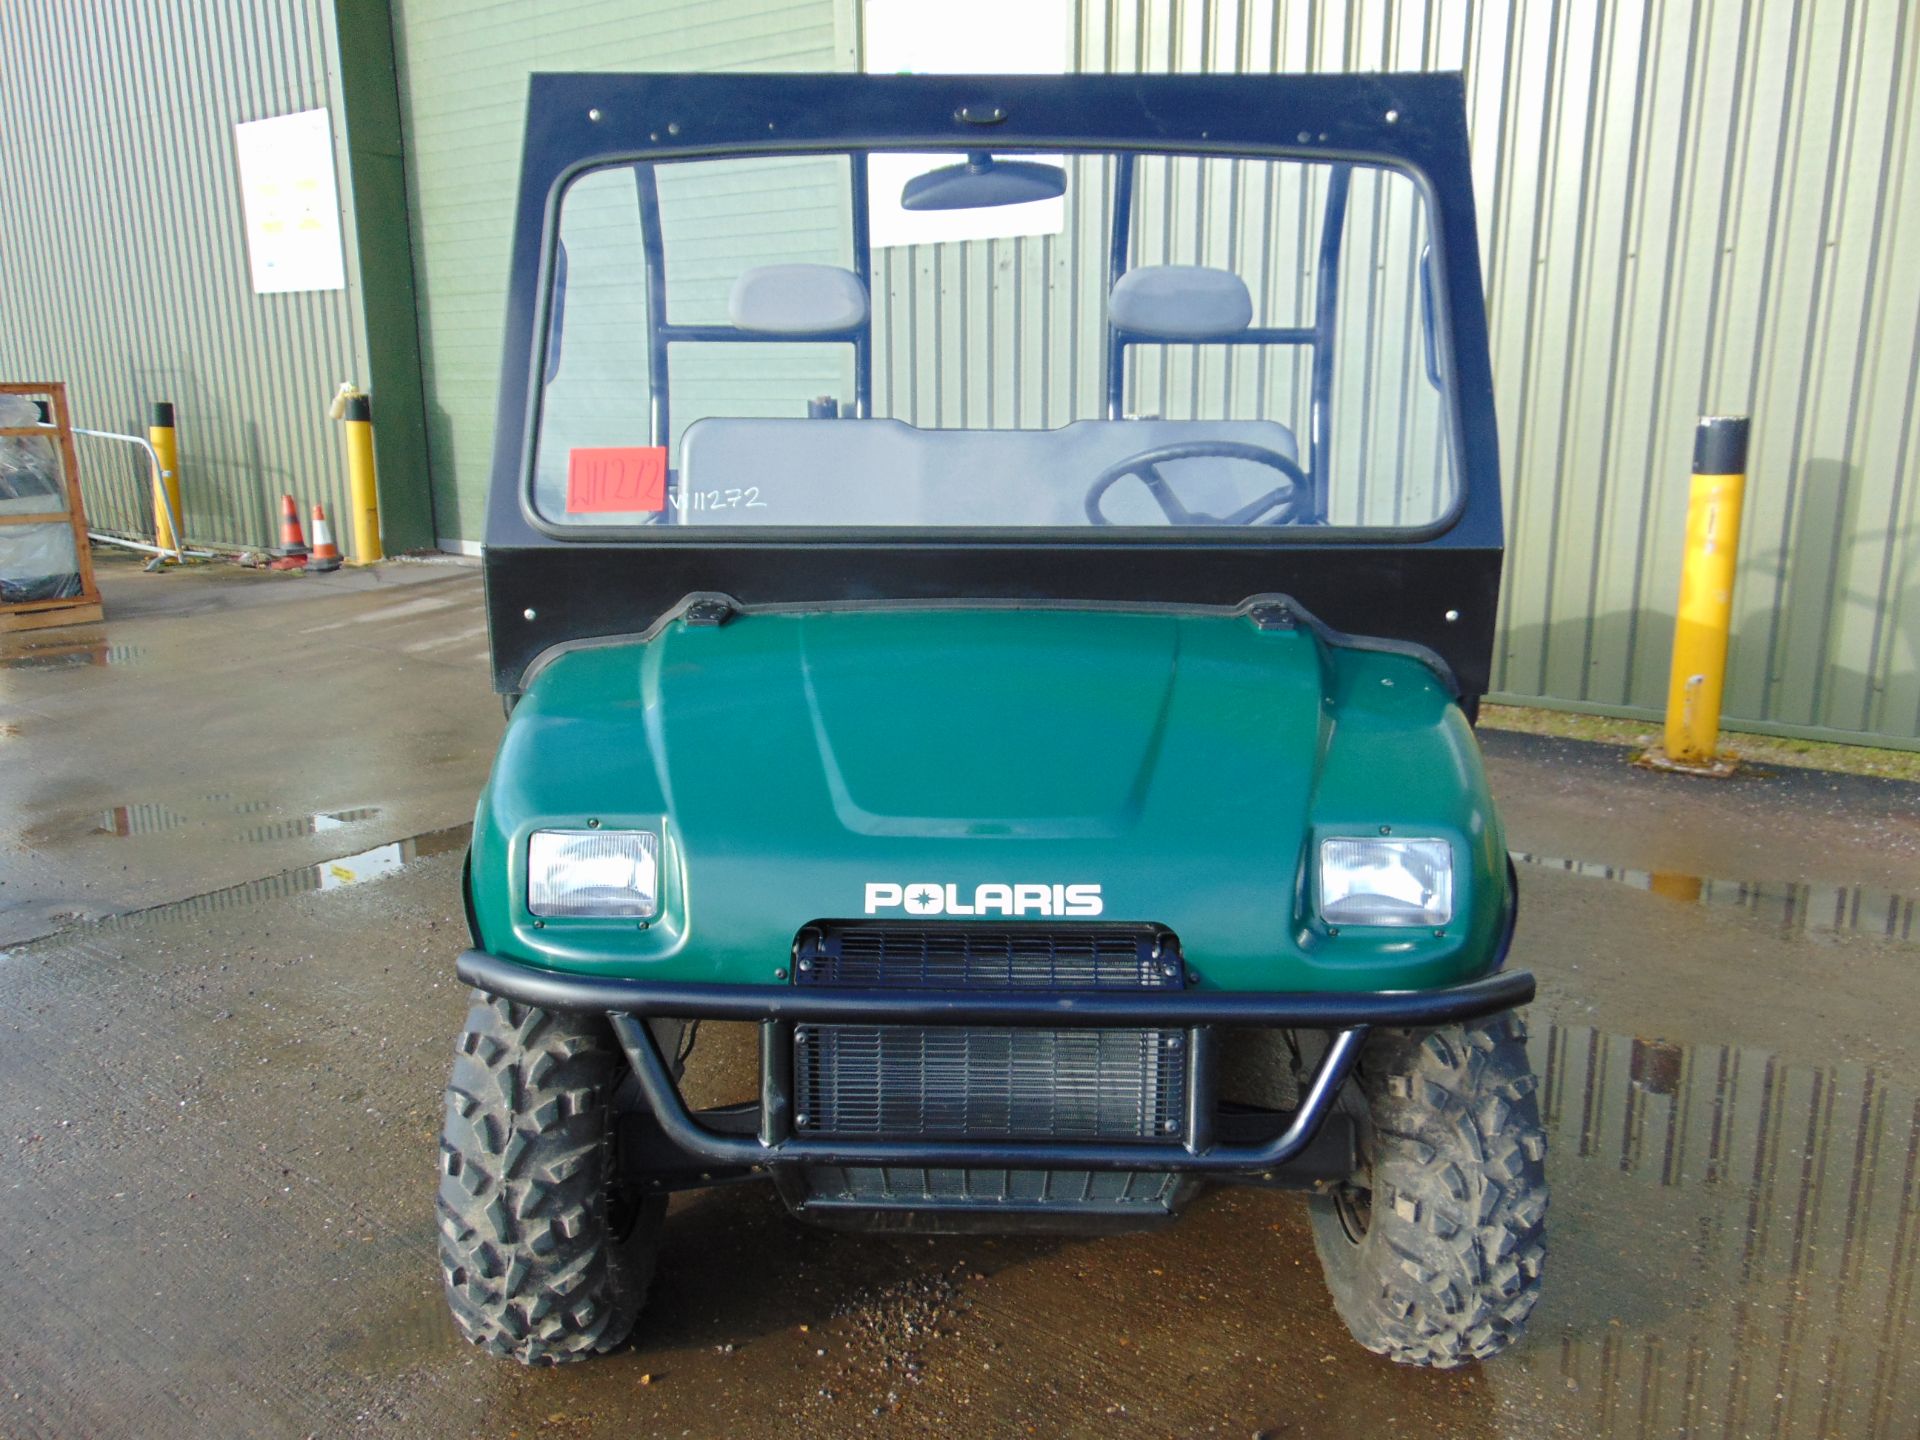 Polaris 6x6 800 EFI Ranger Utility Vehicle ONLY 280 HOURS from Govt Dept - Image 2 of 19